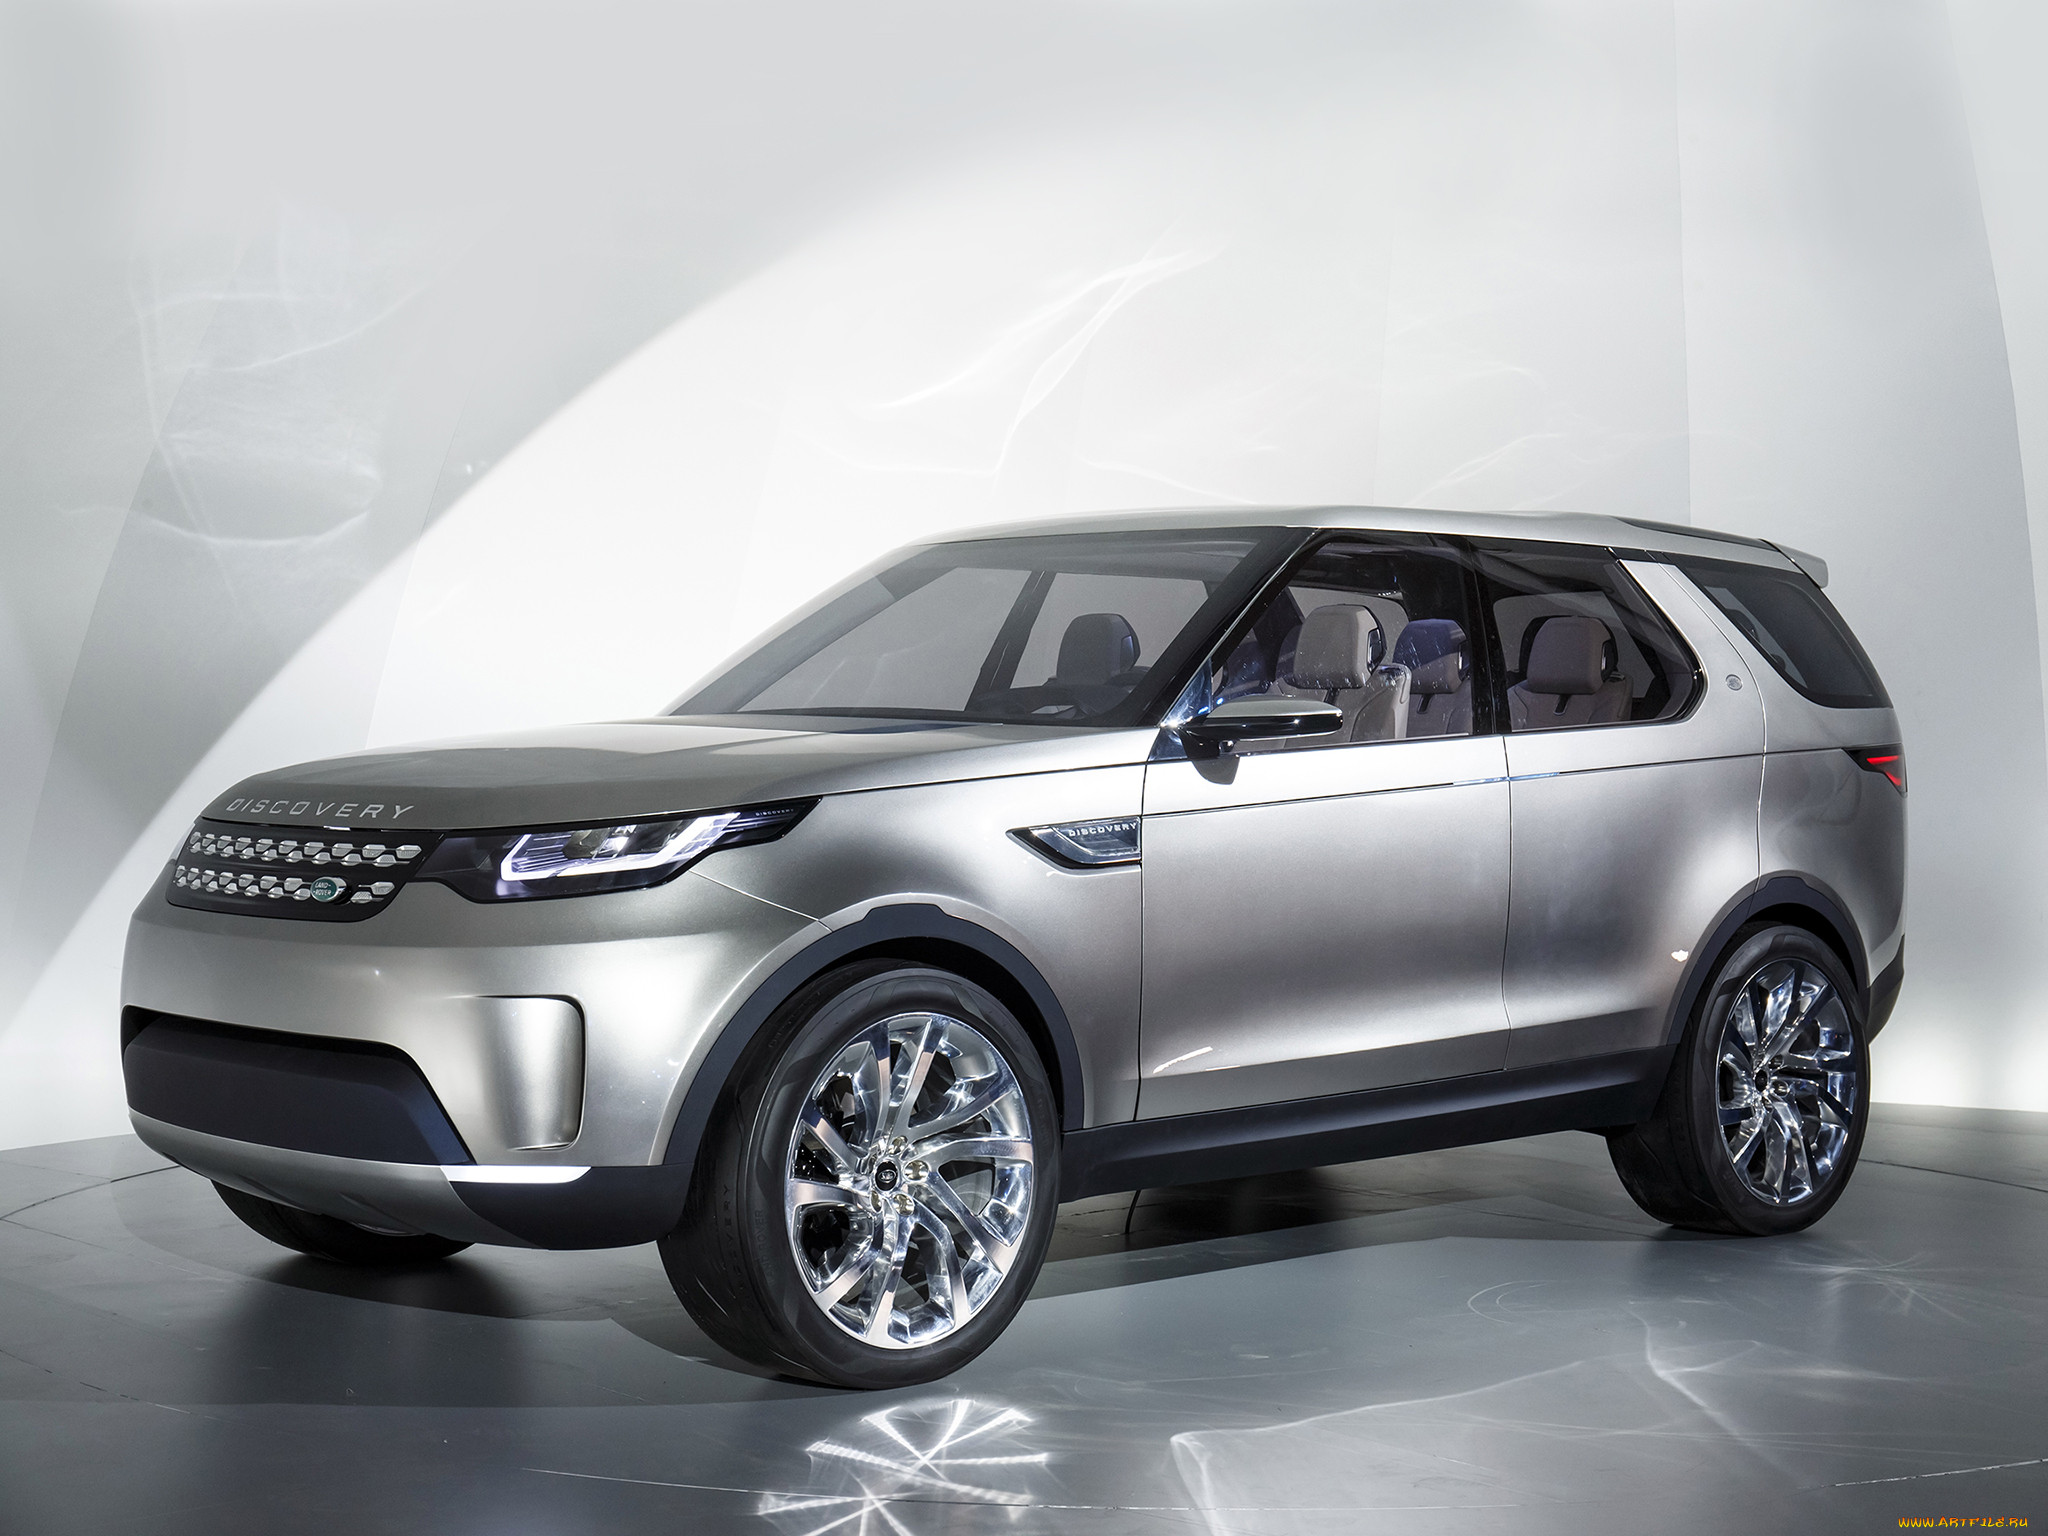 , land-rover, , discovery, 2014, land, rover, concept, vision